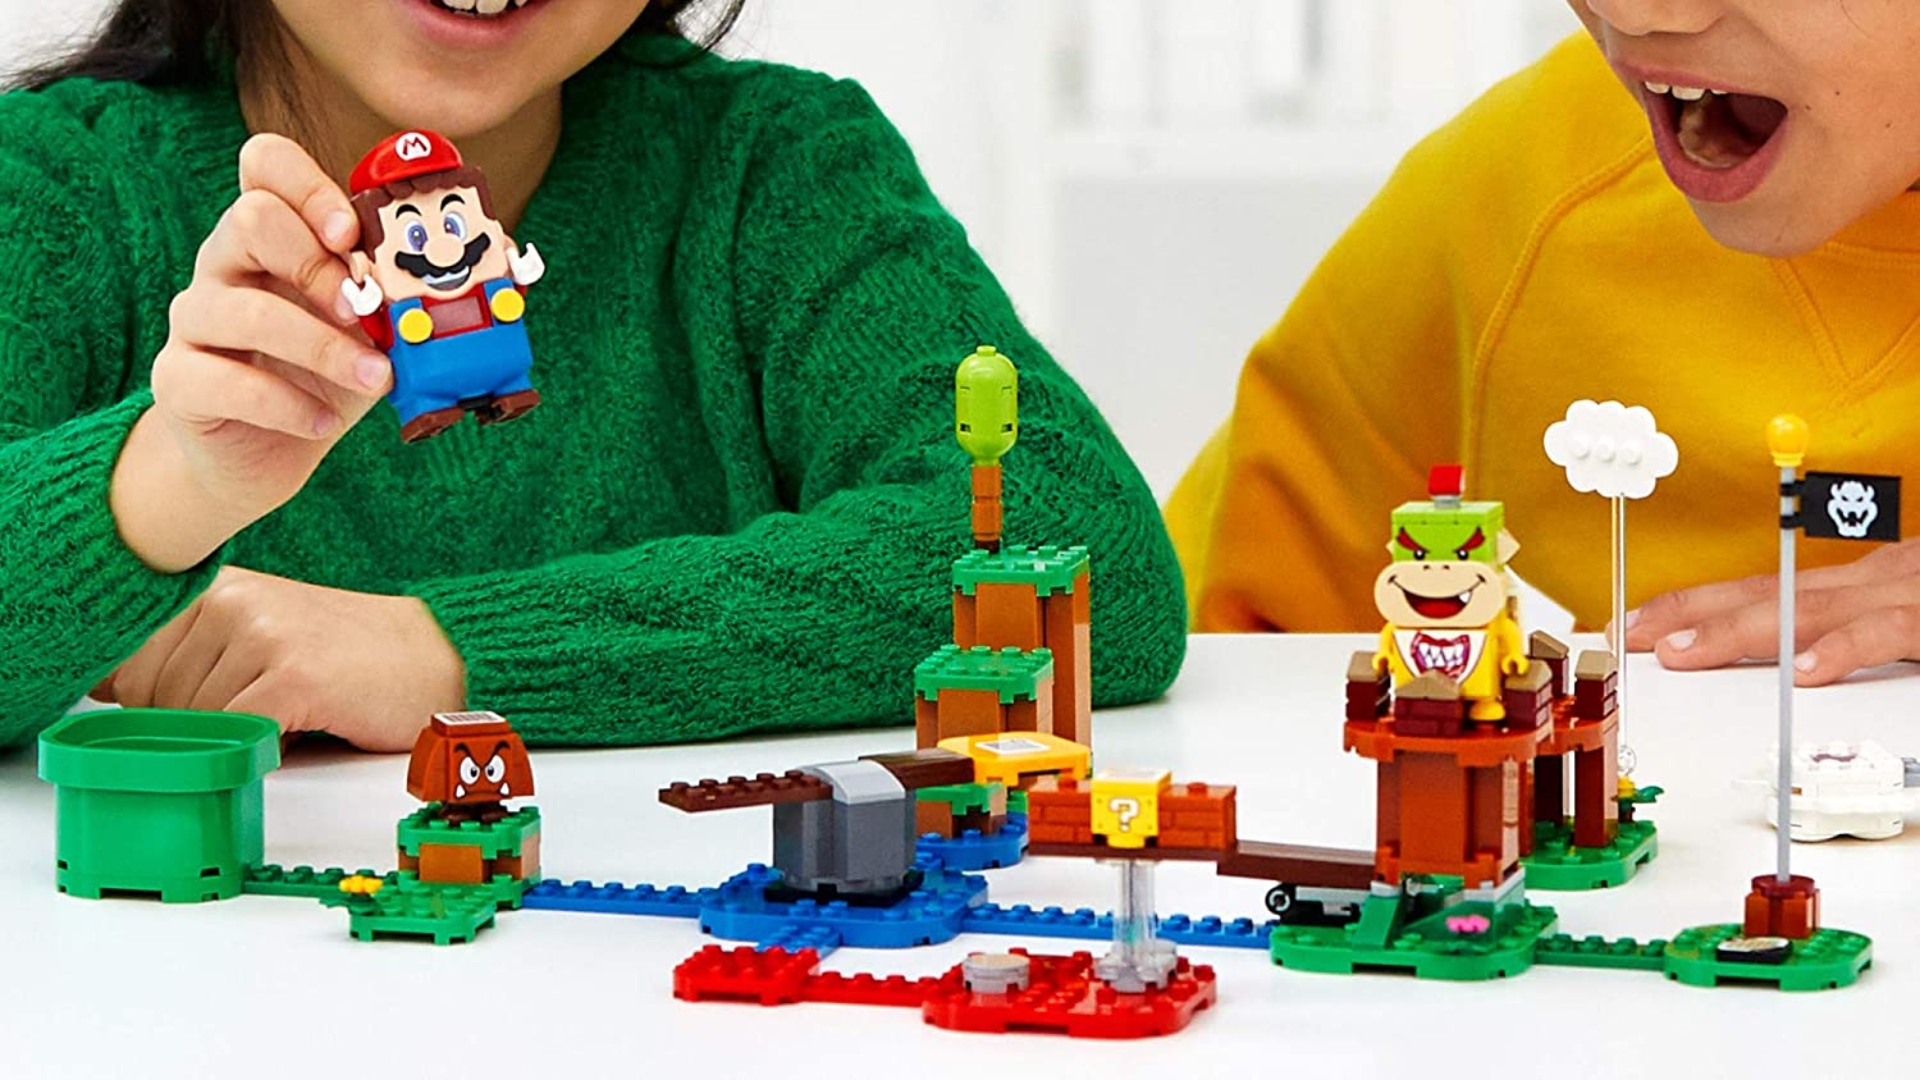 A couple of children joyfully playing with a LEGO Mario set.